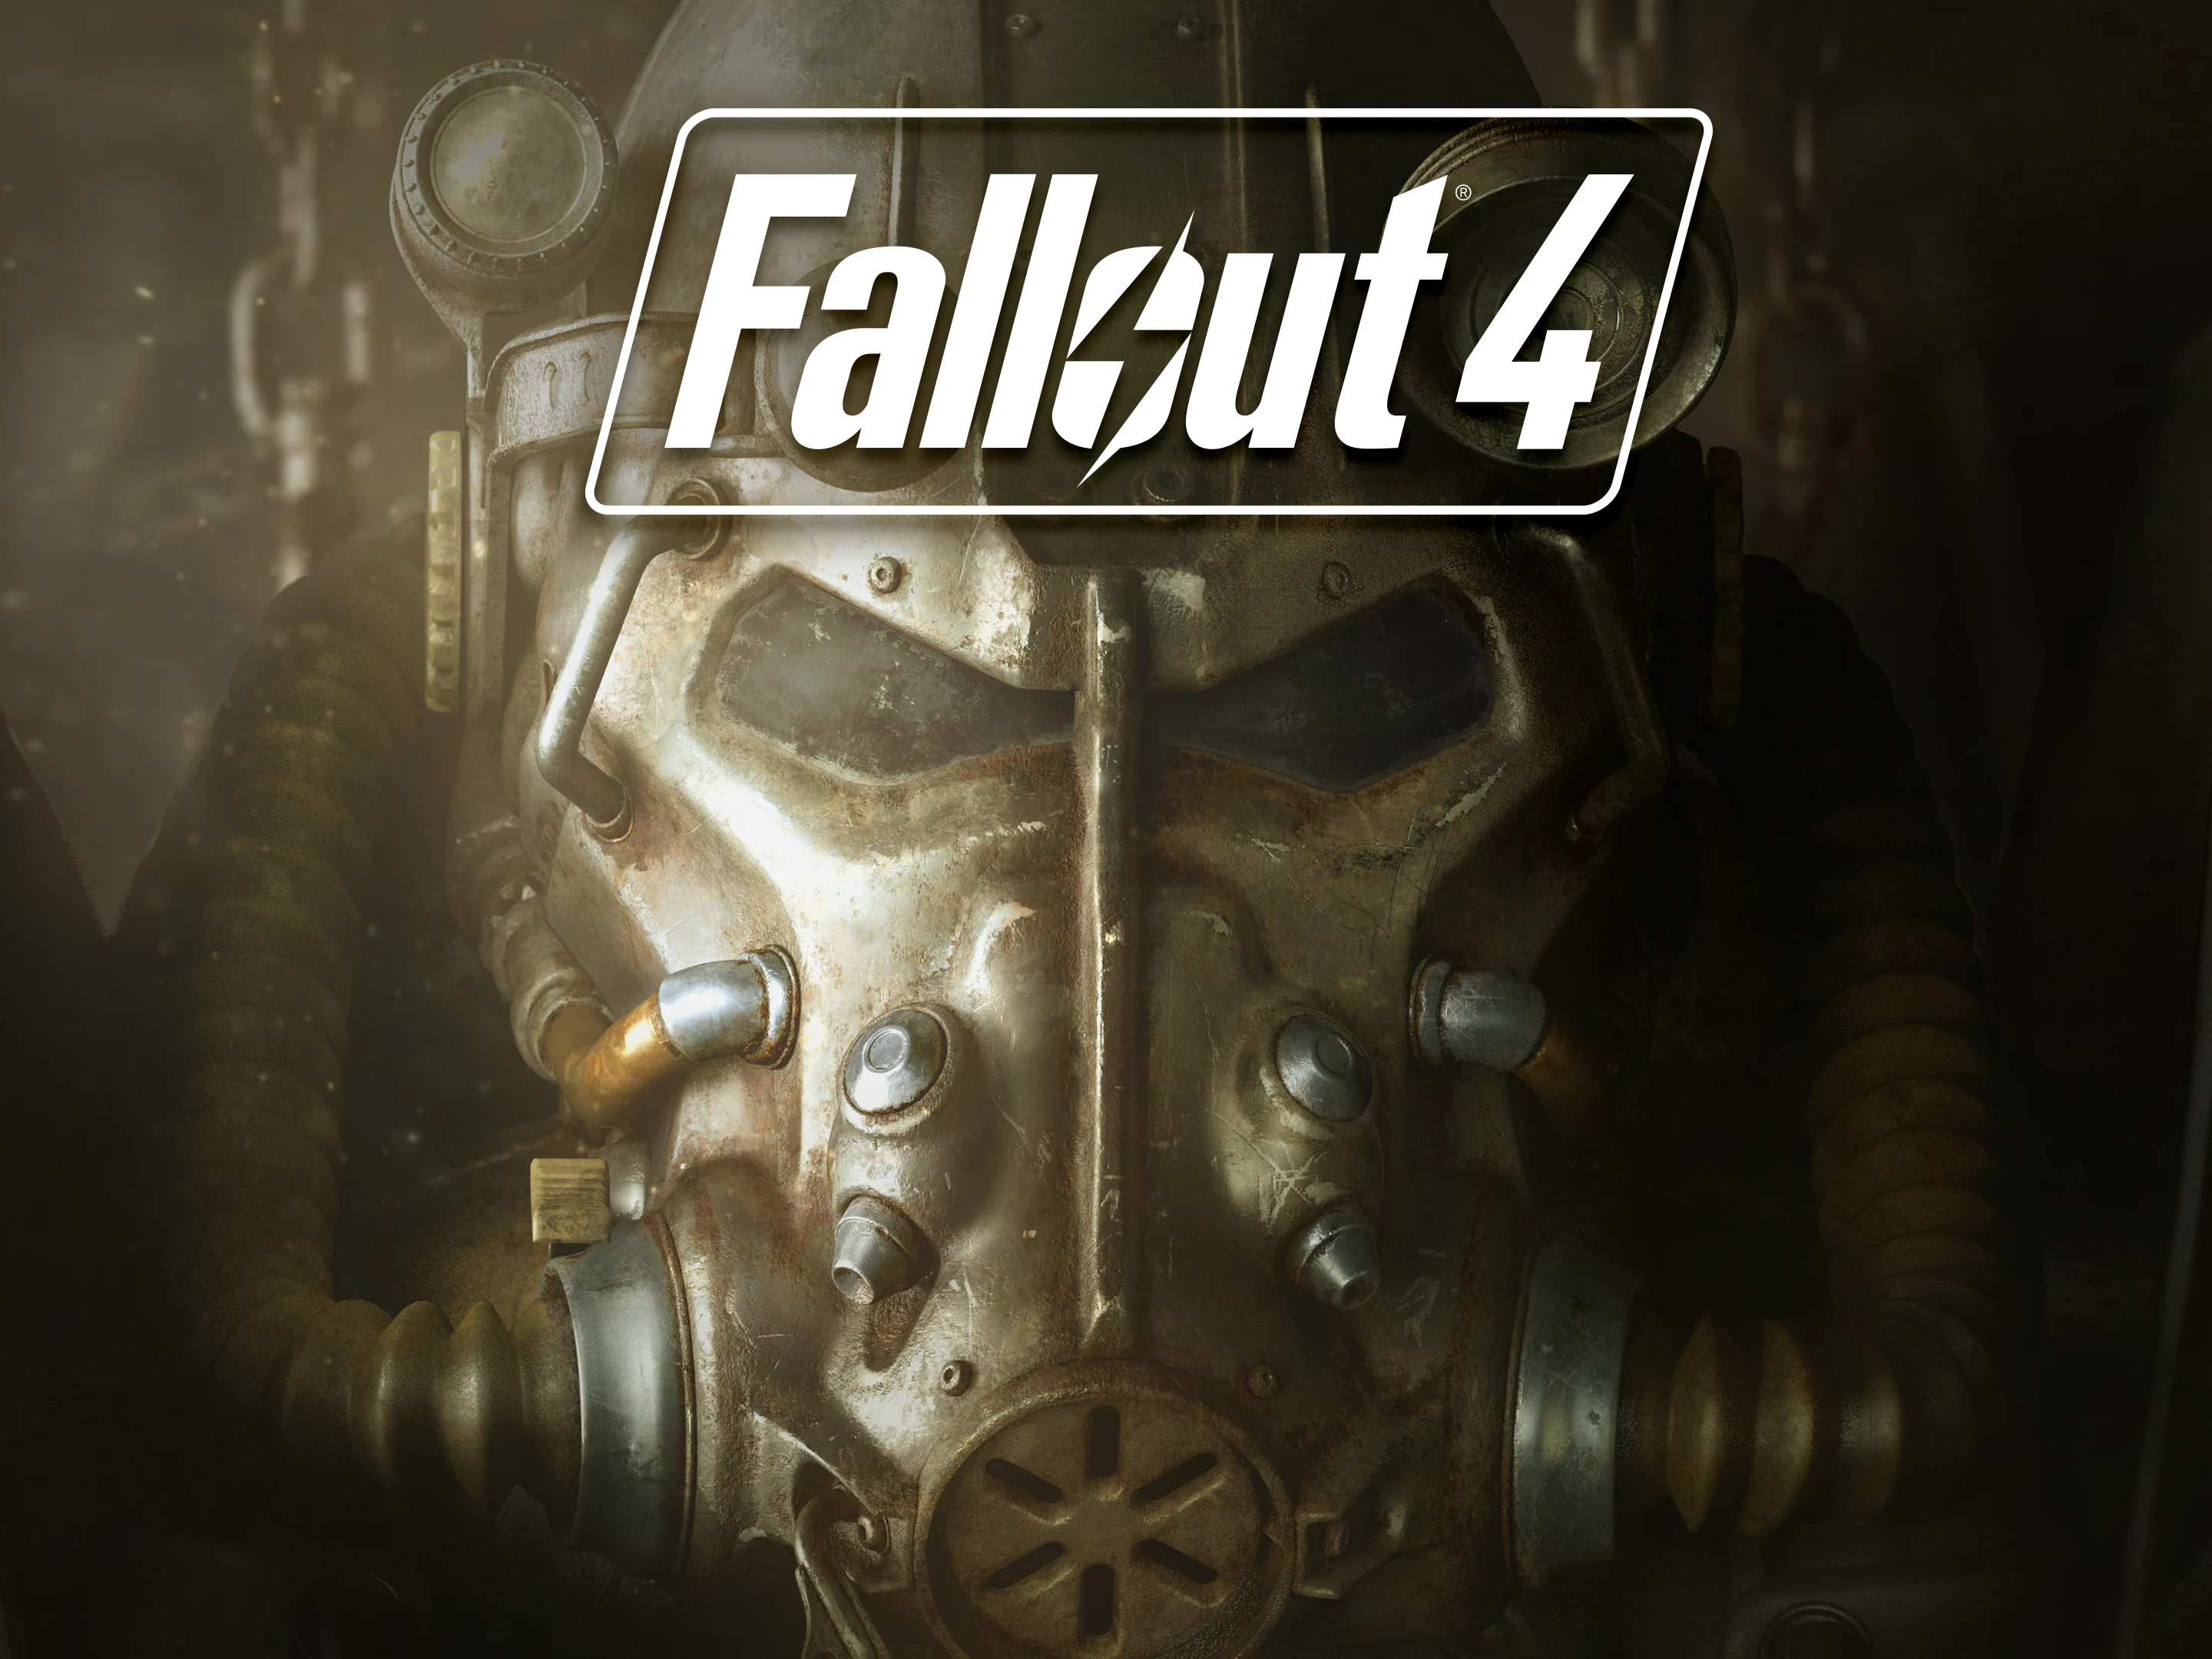 Download Fallout 4 Game Full Version